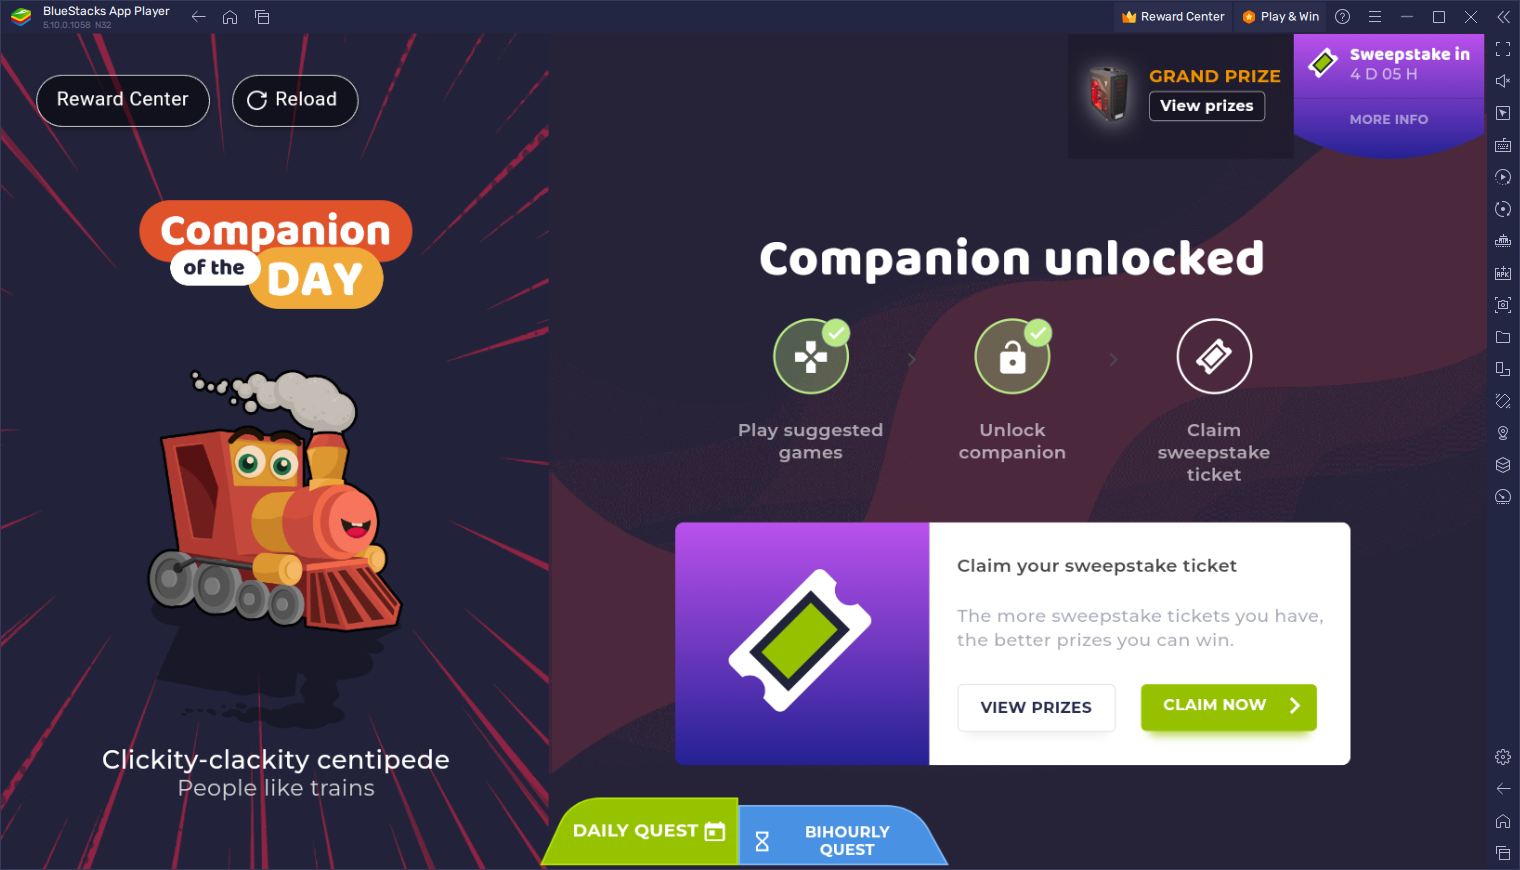 BlueStacks 5 ‘Play & Win’ Feature Lets Players Earn Awesome Digital and Physical Rewards